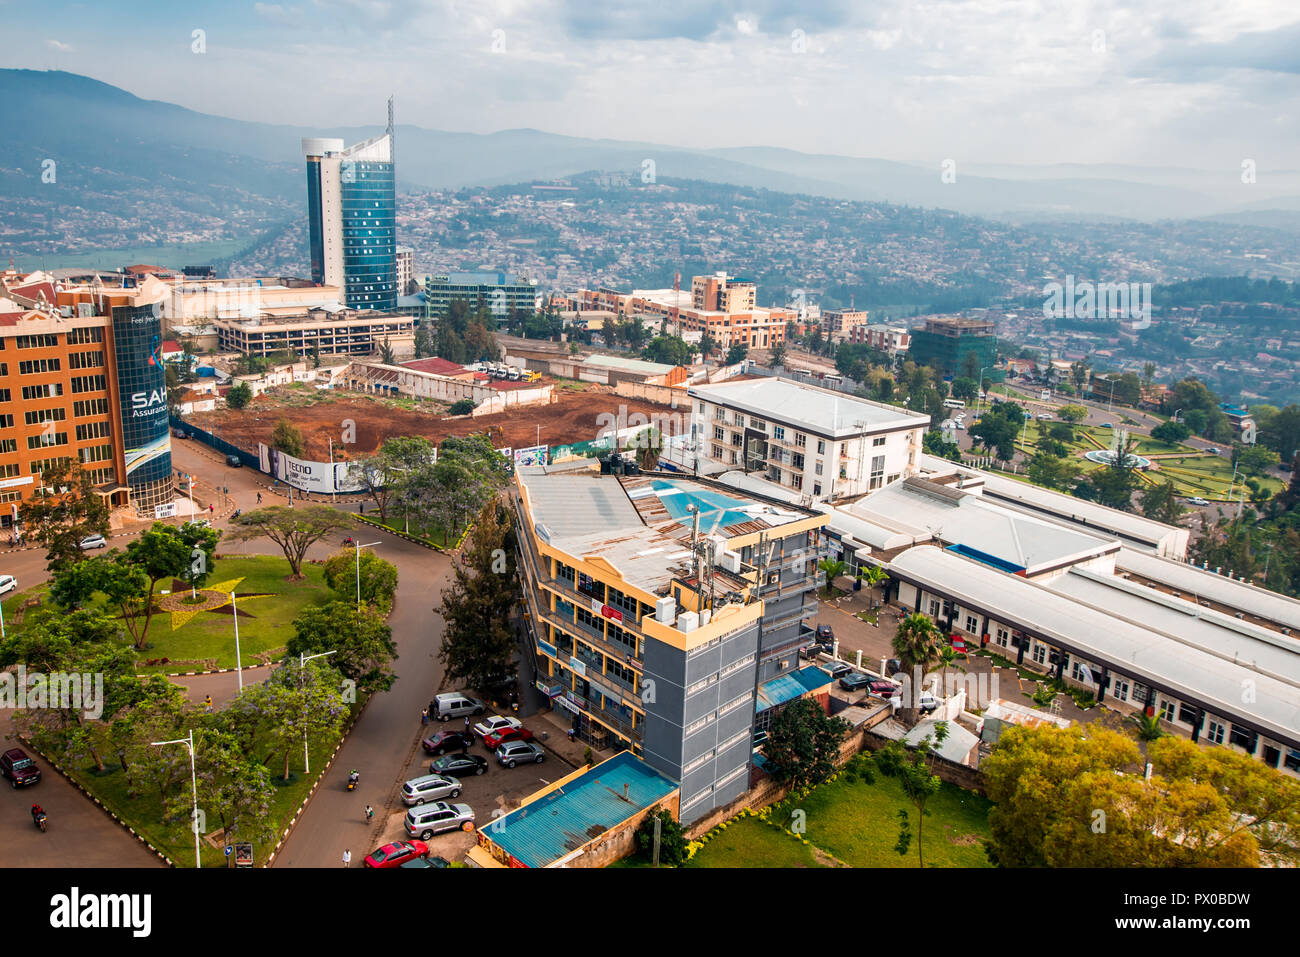 Kigali, Rwanda - September 21, 2018: a wide panoramic view looking down on the city centre with Kigali City Tower against the backdrop of distant blue Stock Photo